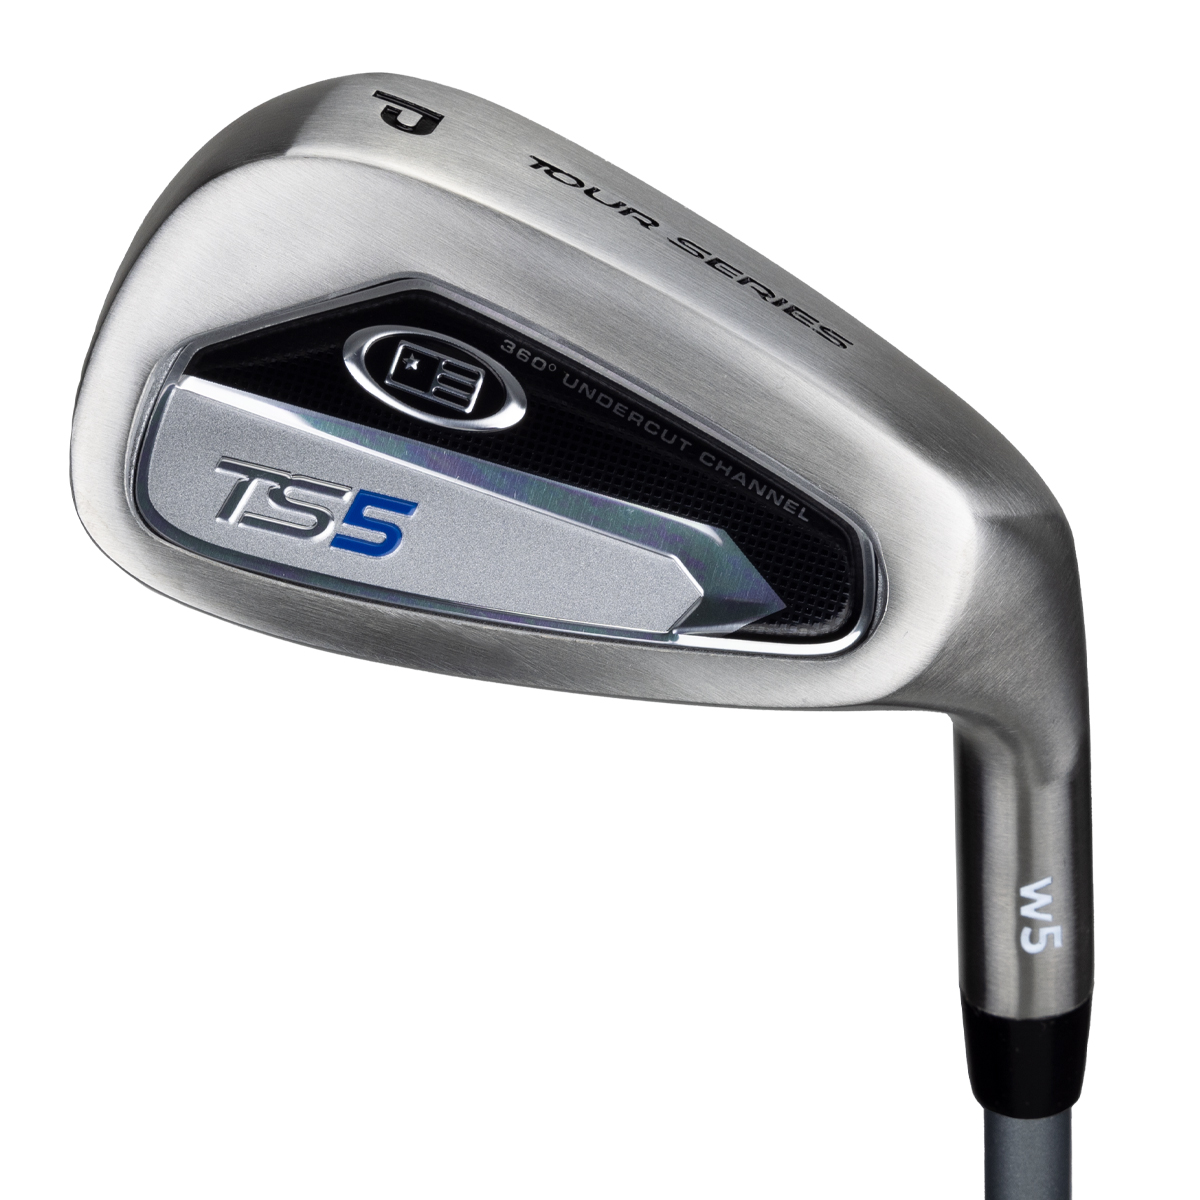 TS5-63  Pitching Wedge, w5 Graphite Shaft